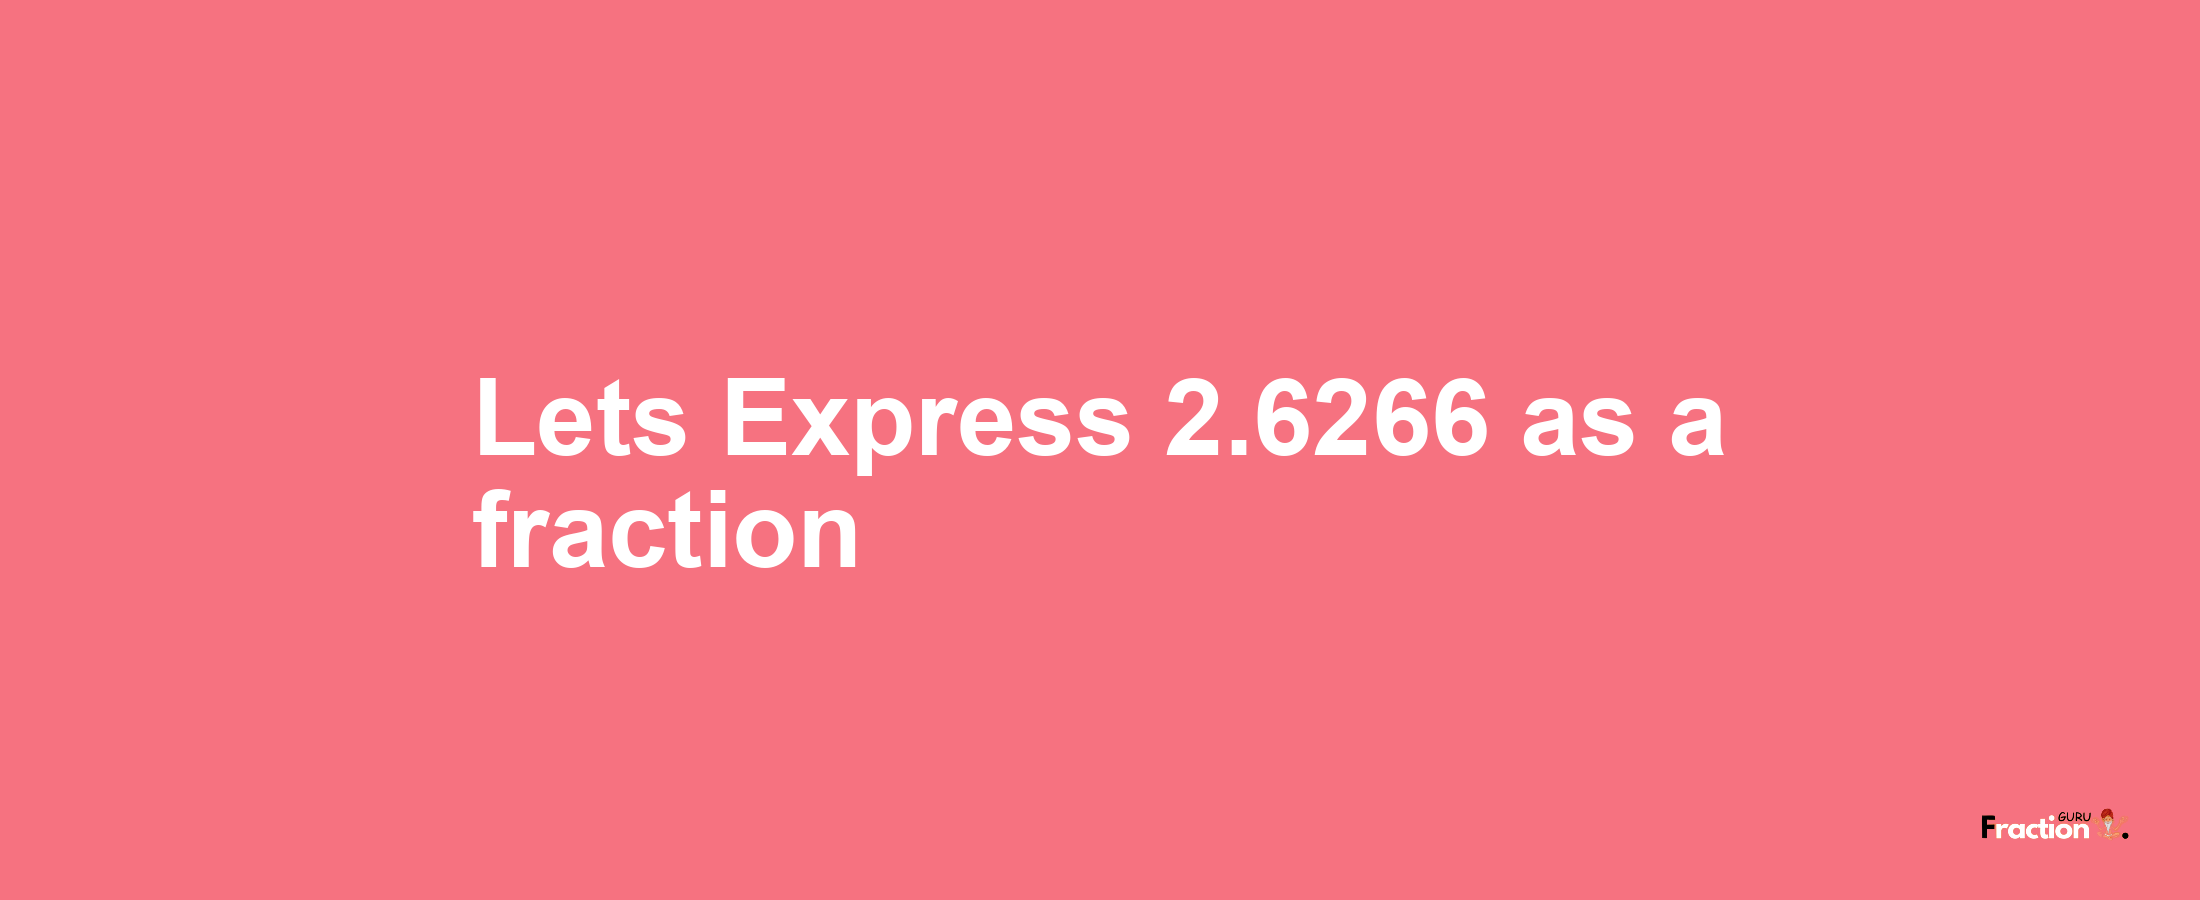 Lets Express 2.6266 as afraction